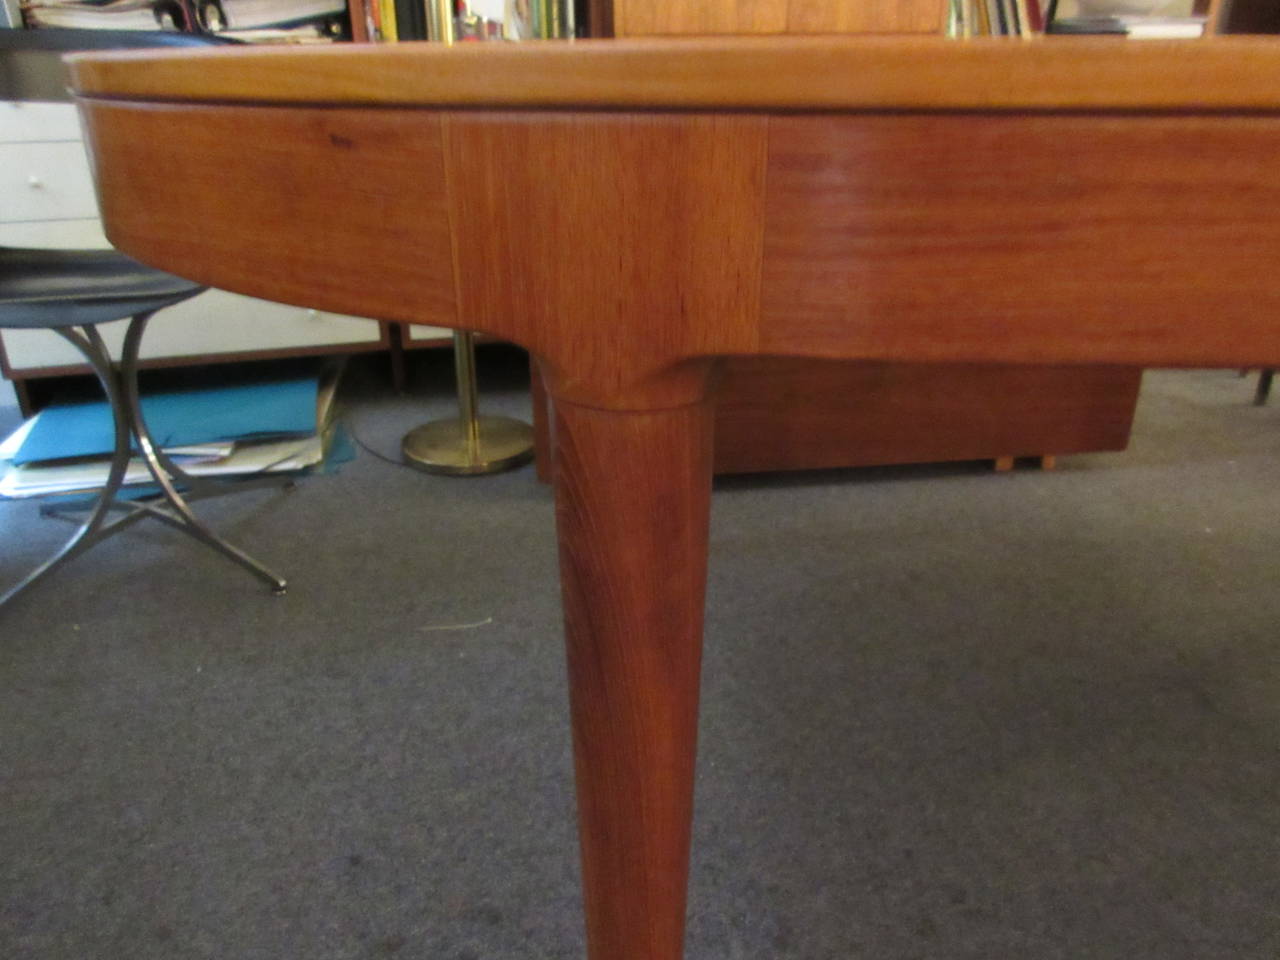 Table that can accommodate 12 with ease. Two Bi-fold 19.5 inch leaves are stored internally and can be put in place by one person. The two leaves extend the table to a length of 122 inches. Legs do not move to expand table. Legs are solid teak and